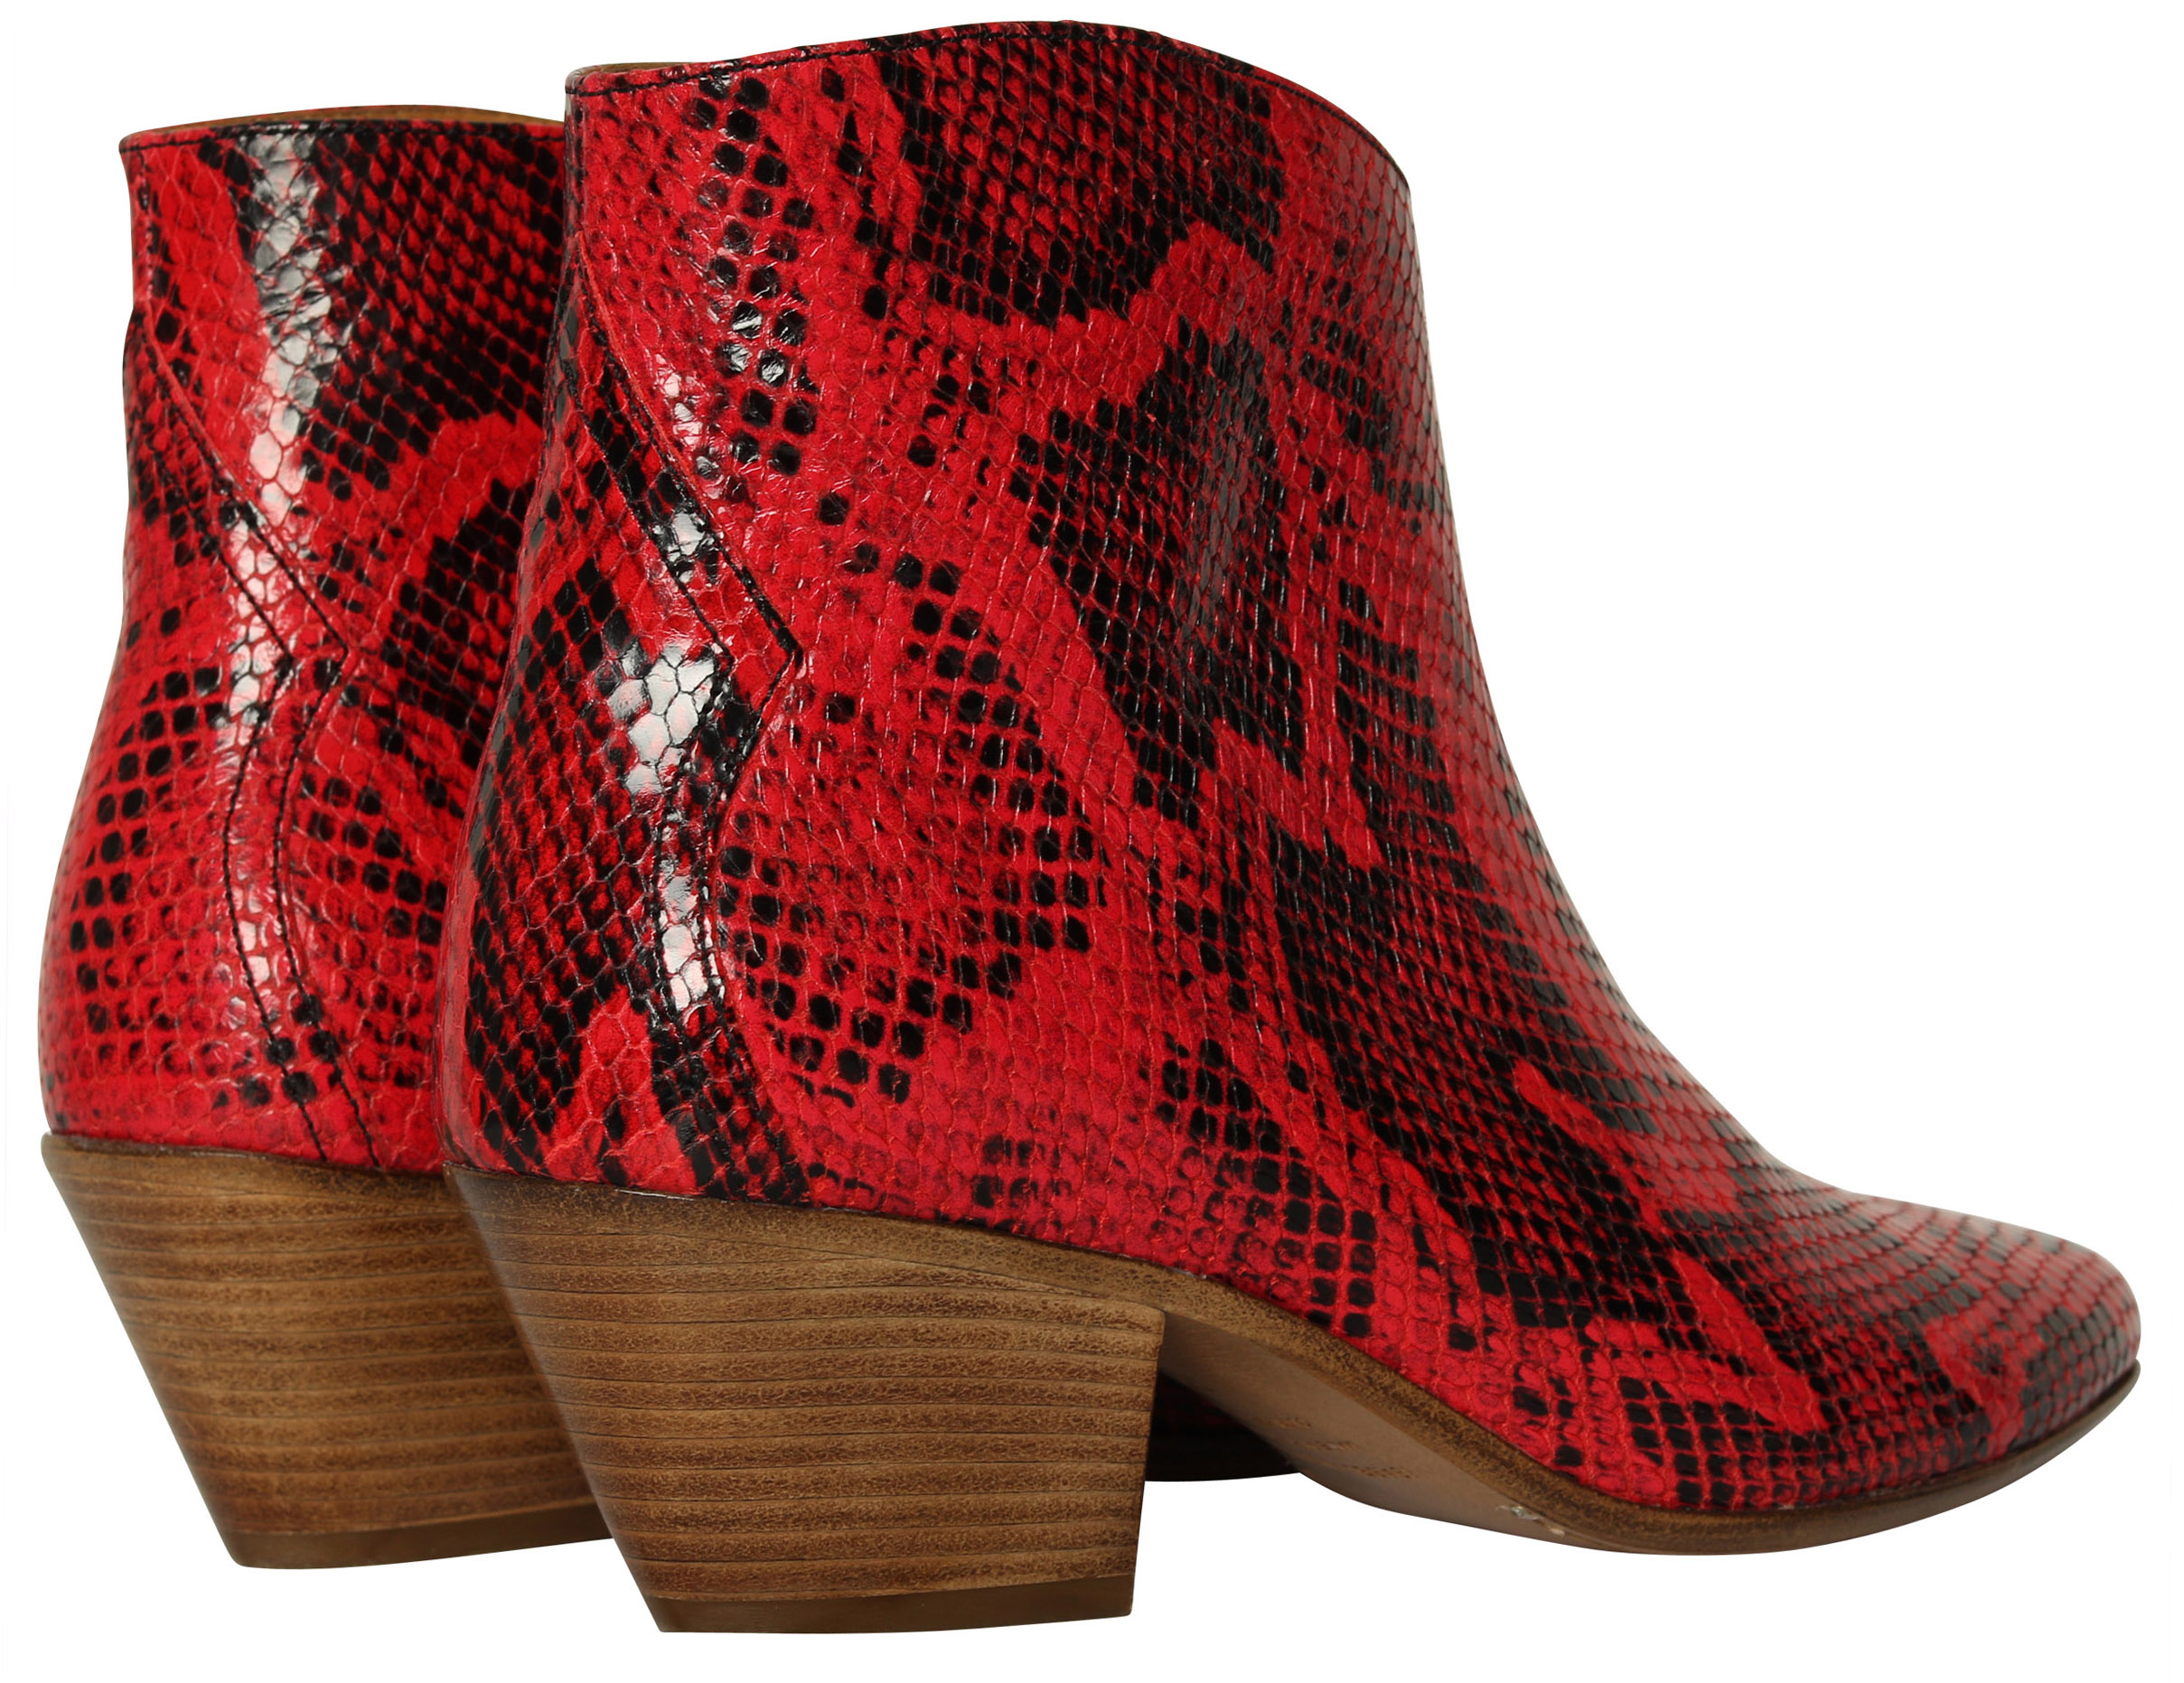 ISABEL MARANT DACKEN BOOTS EXOTIC RED 37